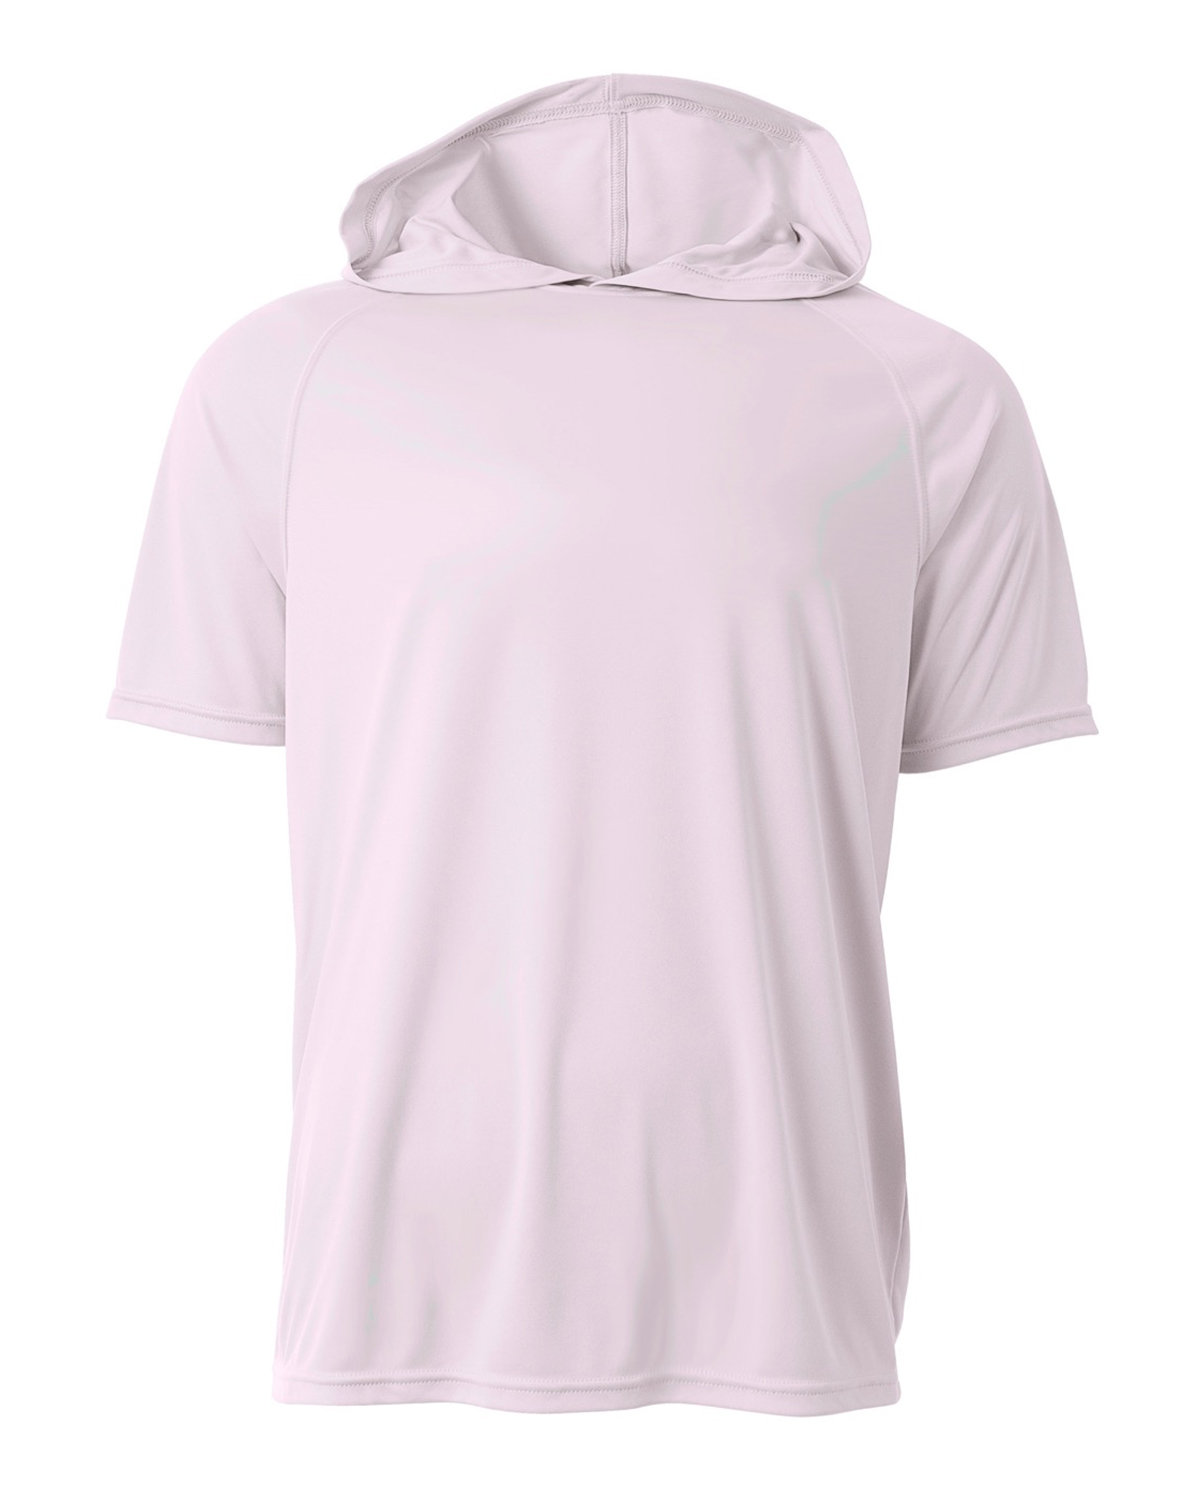 A4 N3408 - Men's Cooling Performance Hooded T-Shirt